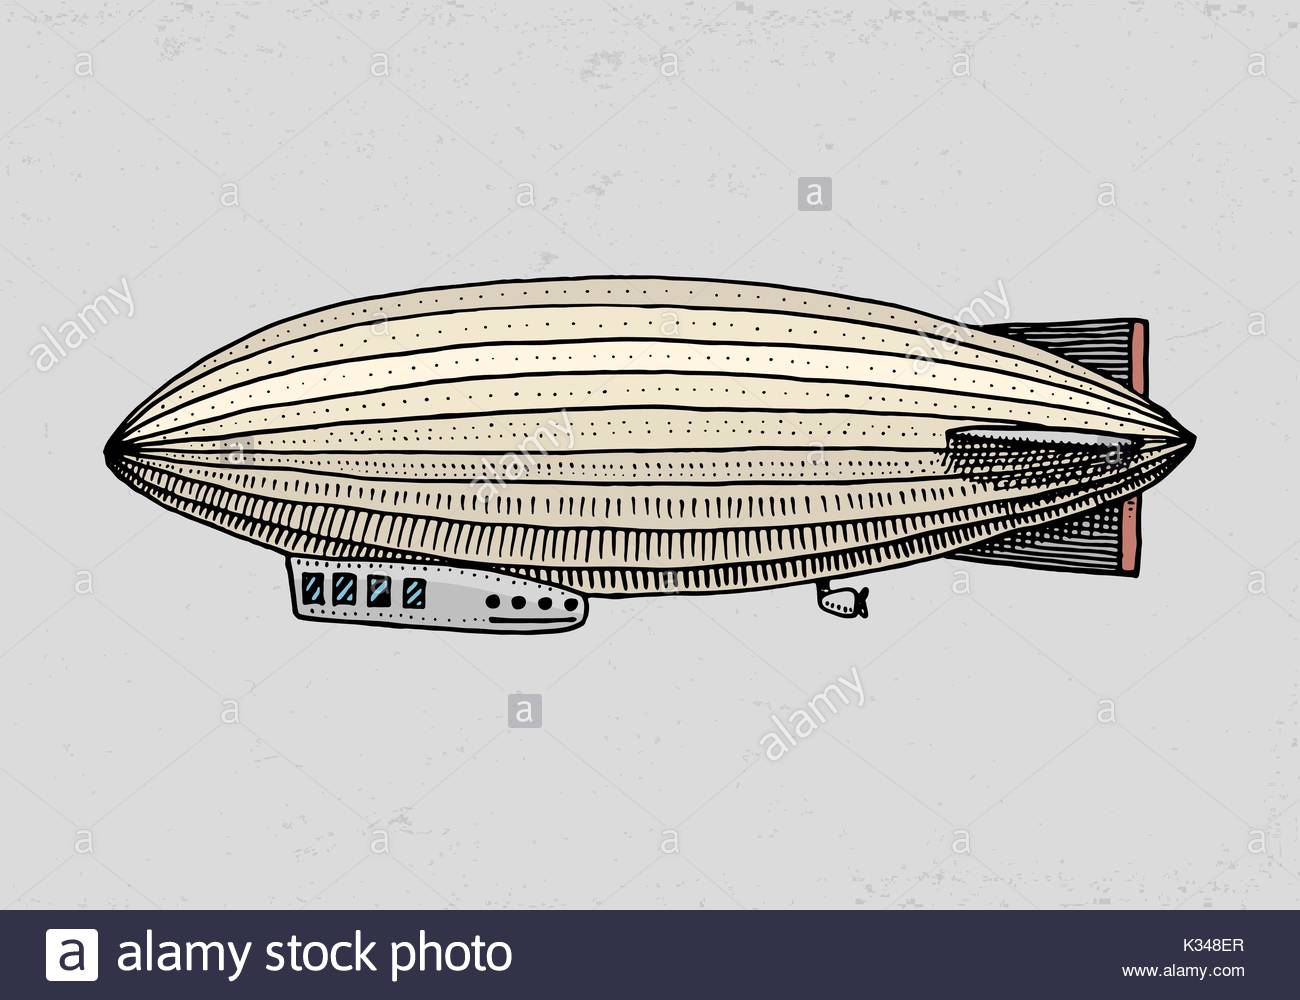 The best free Zeppelin drawing images. Download from 14 free drawings